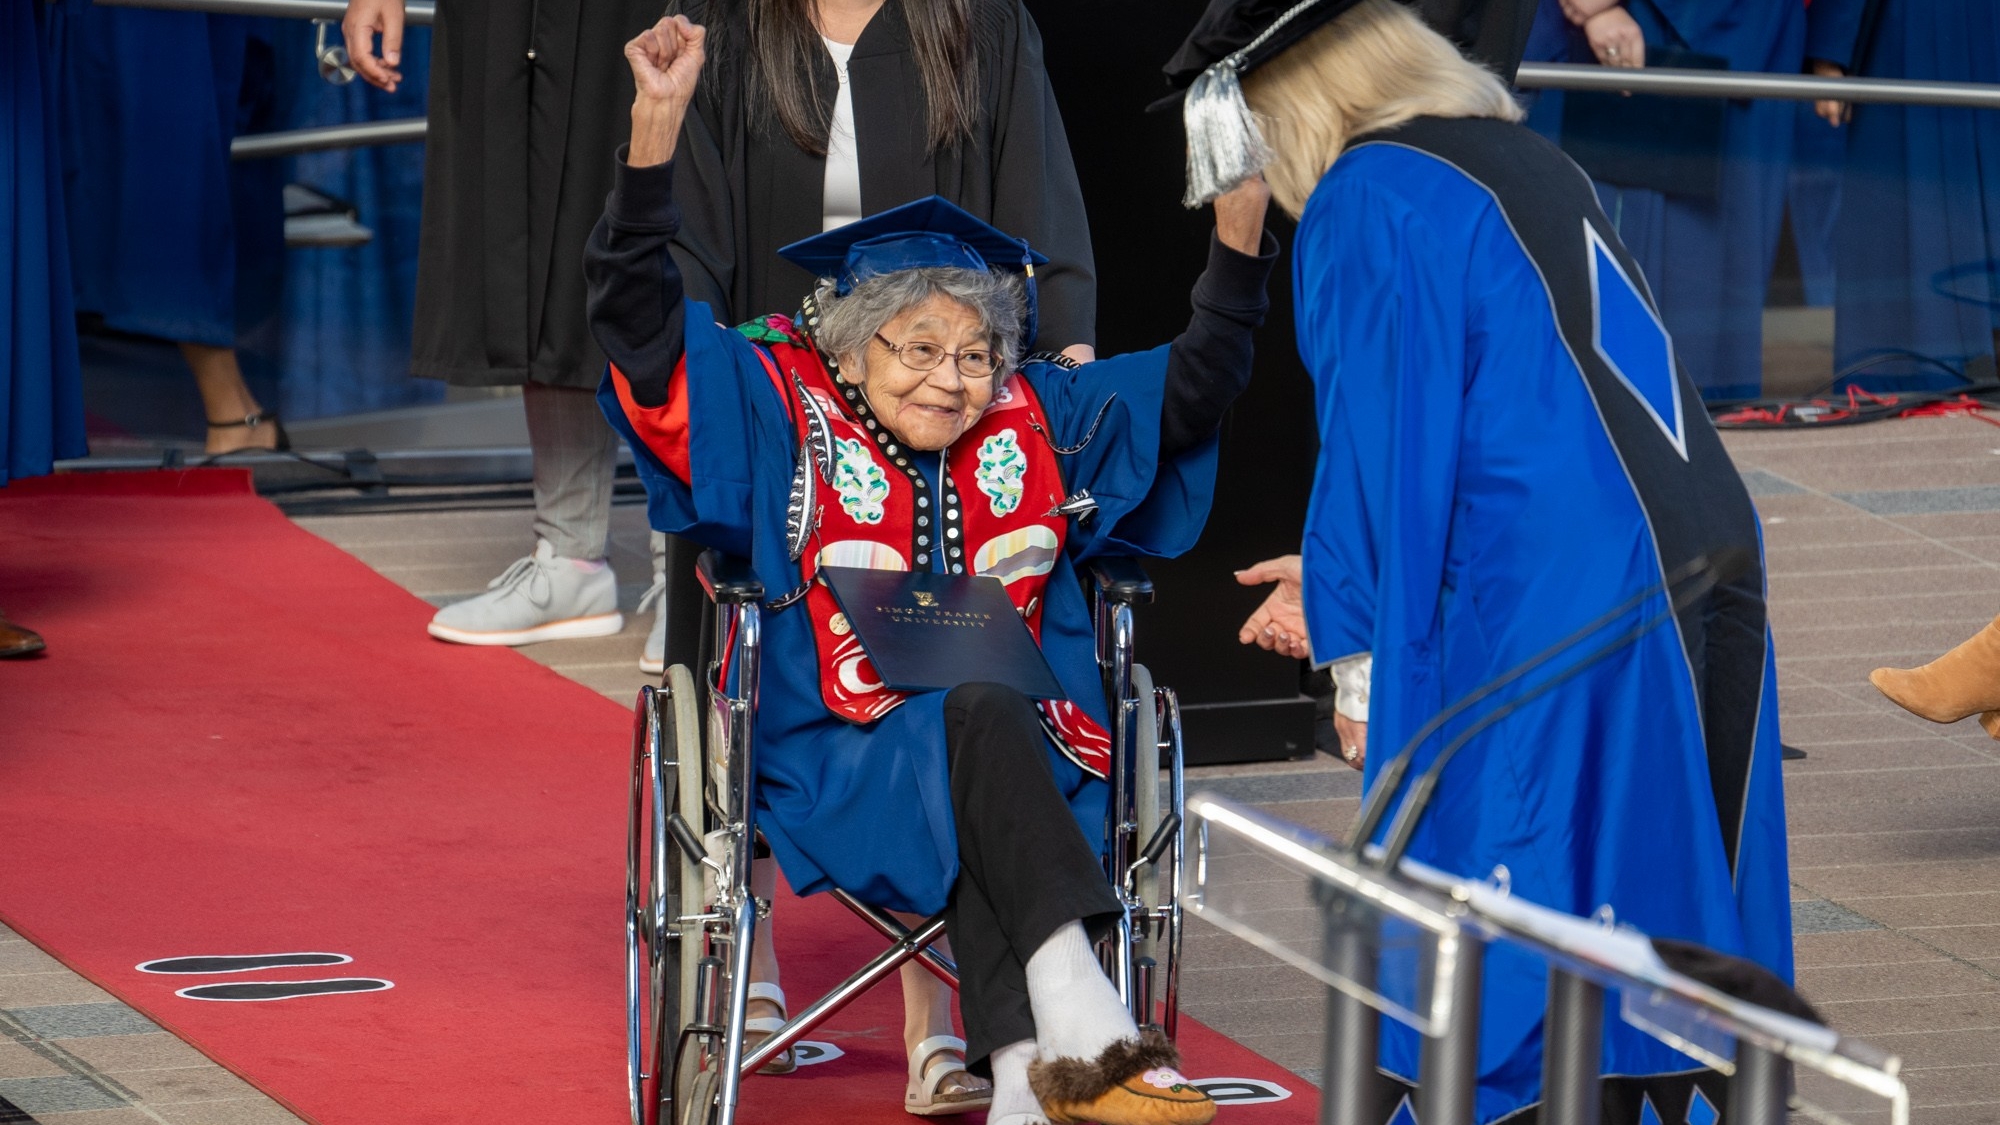 Bessie Cooley crossing the stage at Convocation receiving her MA.